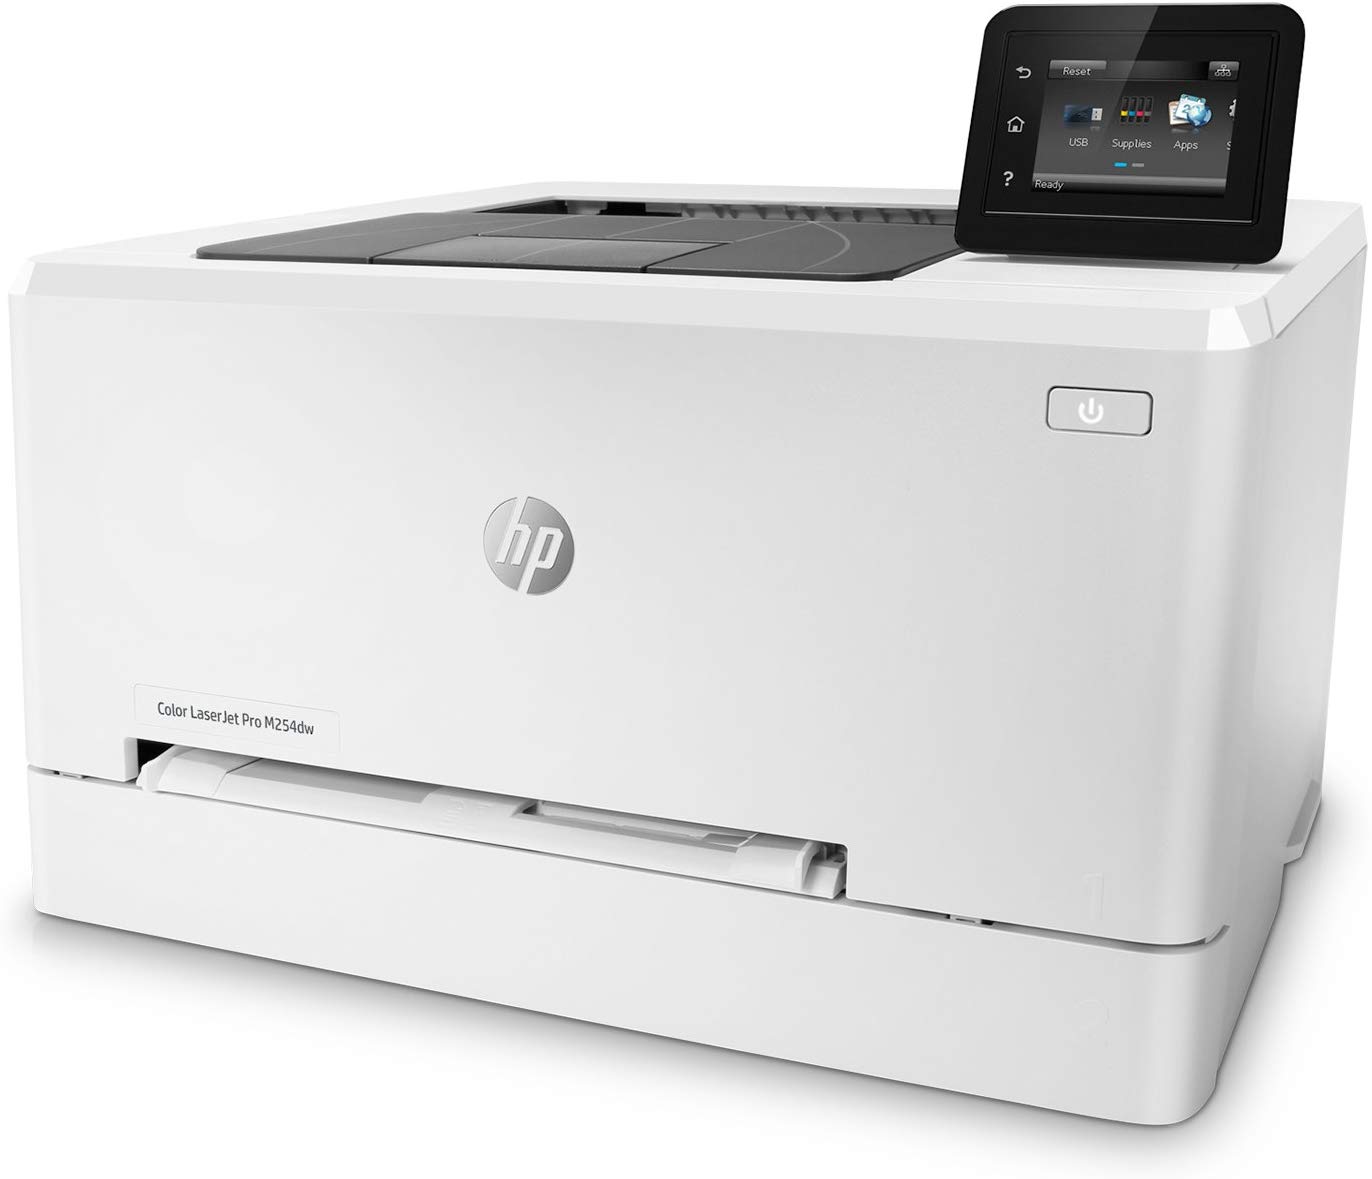 Top 8 Best Color Laser Printers for Small Businesses in 2021 - Reviews and Comparison